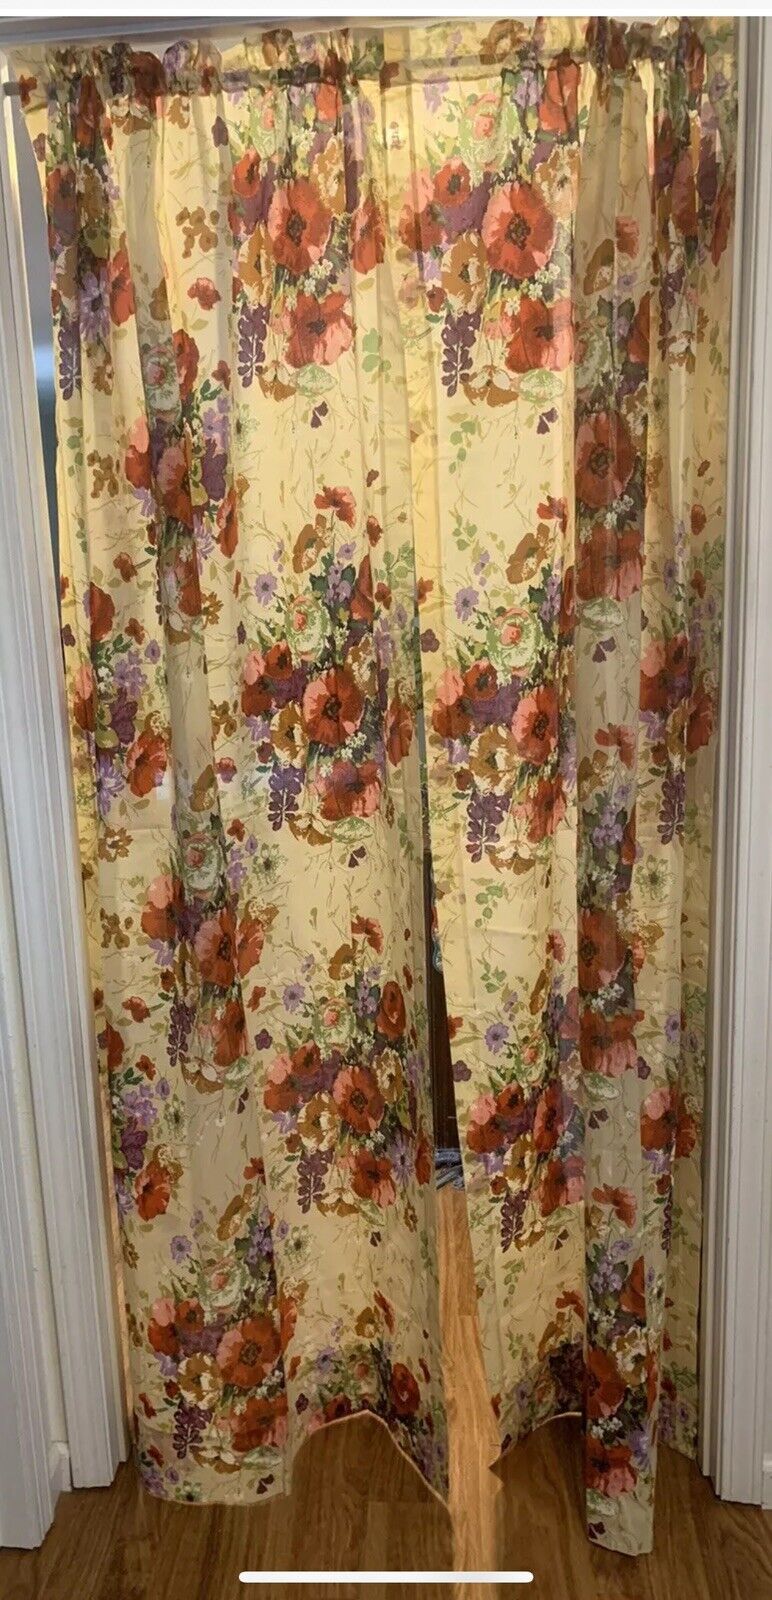 Vintage Curtains 4 Panels JCPenney Floral Penn-Prest 81x41 Never Used 1970s